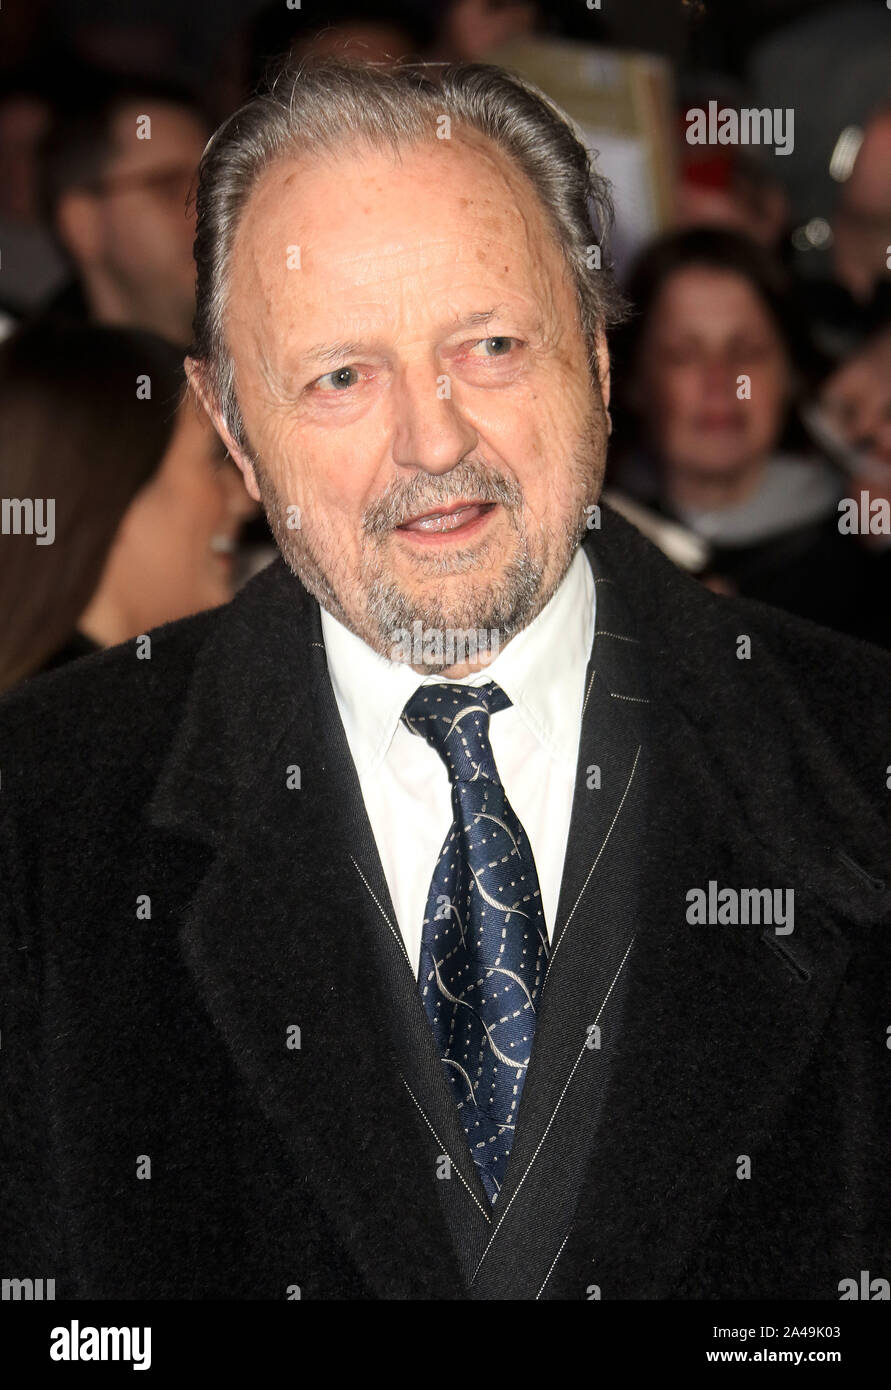 Mar 16, 2017 - London, England, UK - 'Another Mother's Son' World Premiere, Odeon Leicester Square - Red Carpet Arrivals Photo Shows: Peter Bowles Stock Photo